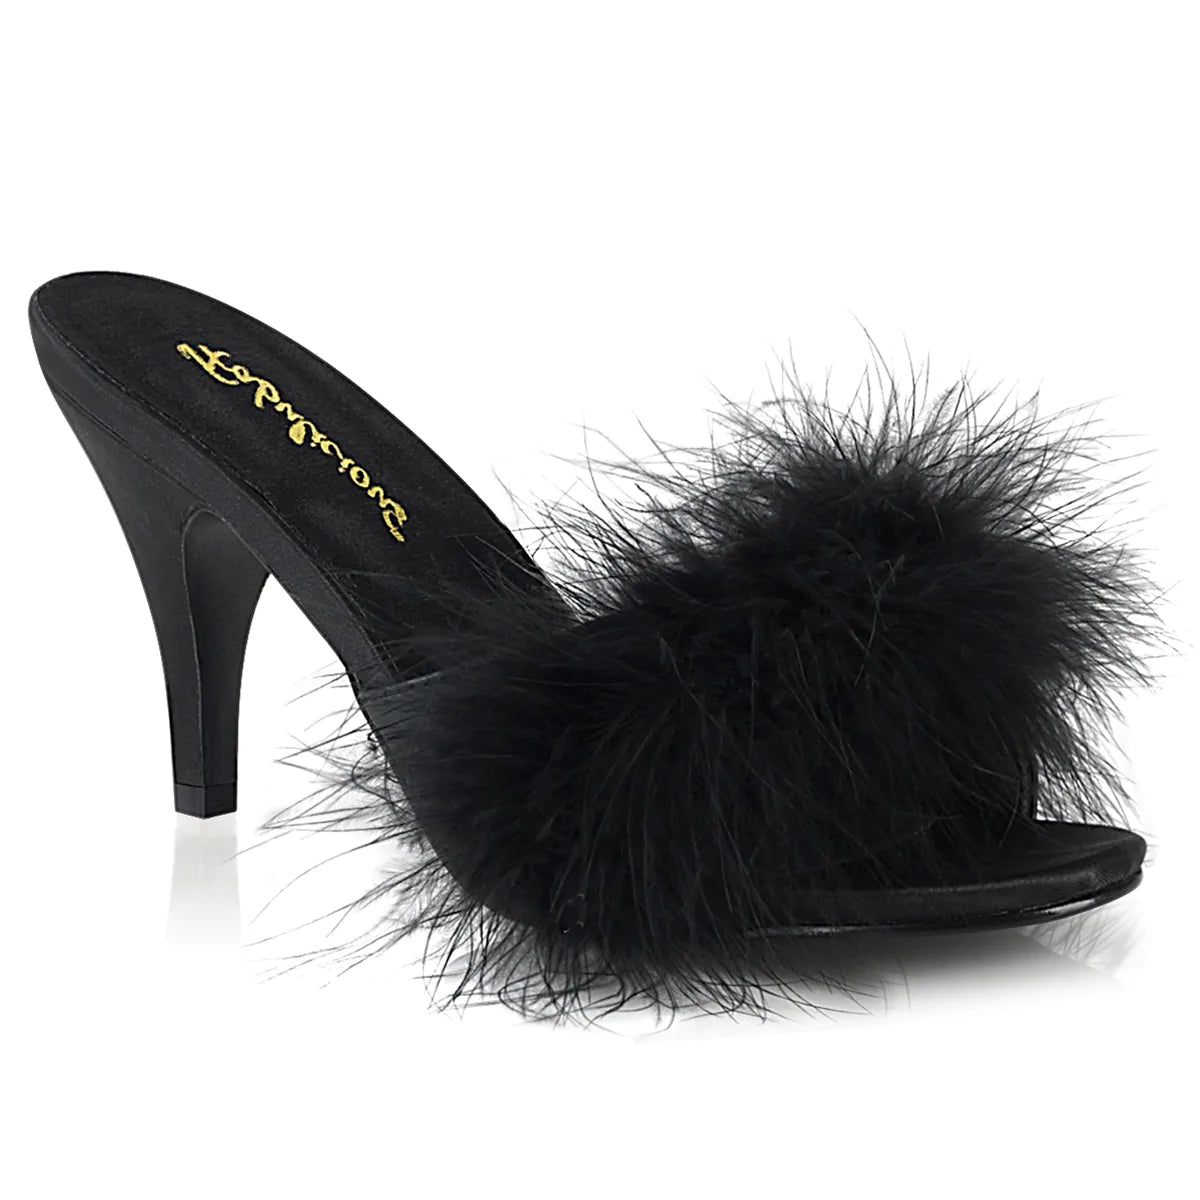 The right side of the black Amour 3" Classic Marabou Slipper.